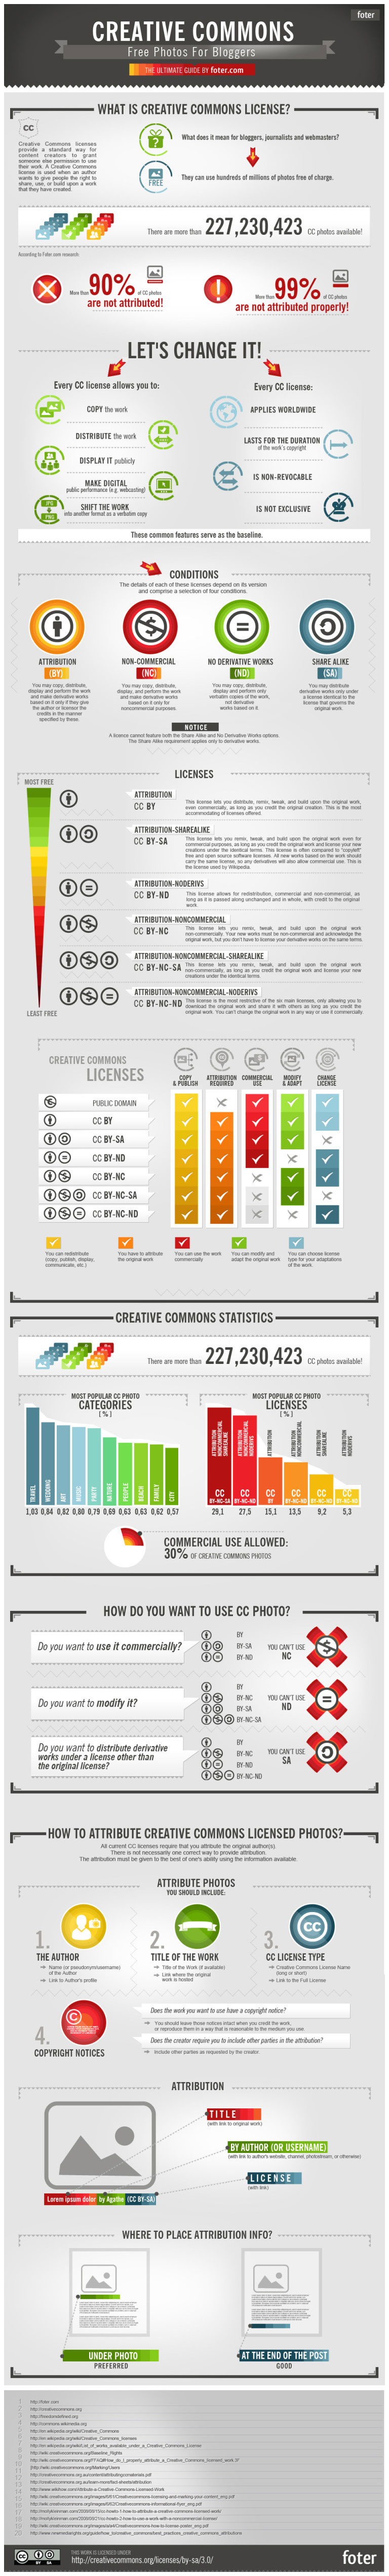 Creative Commons explanation infographic